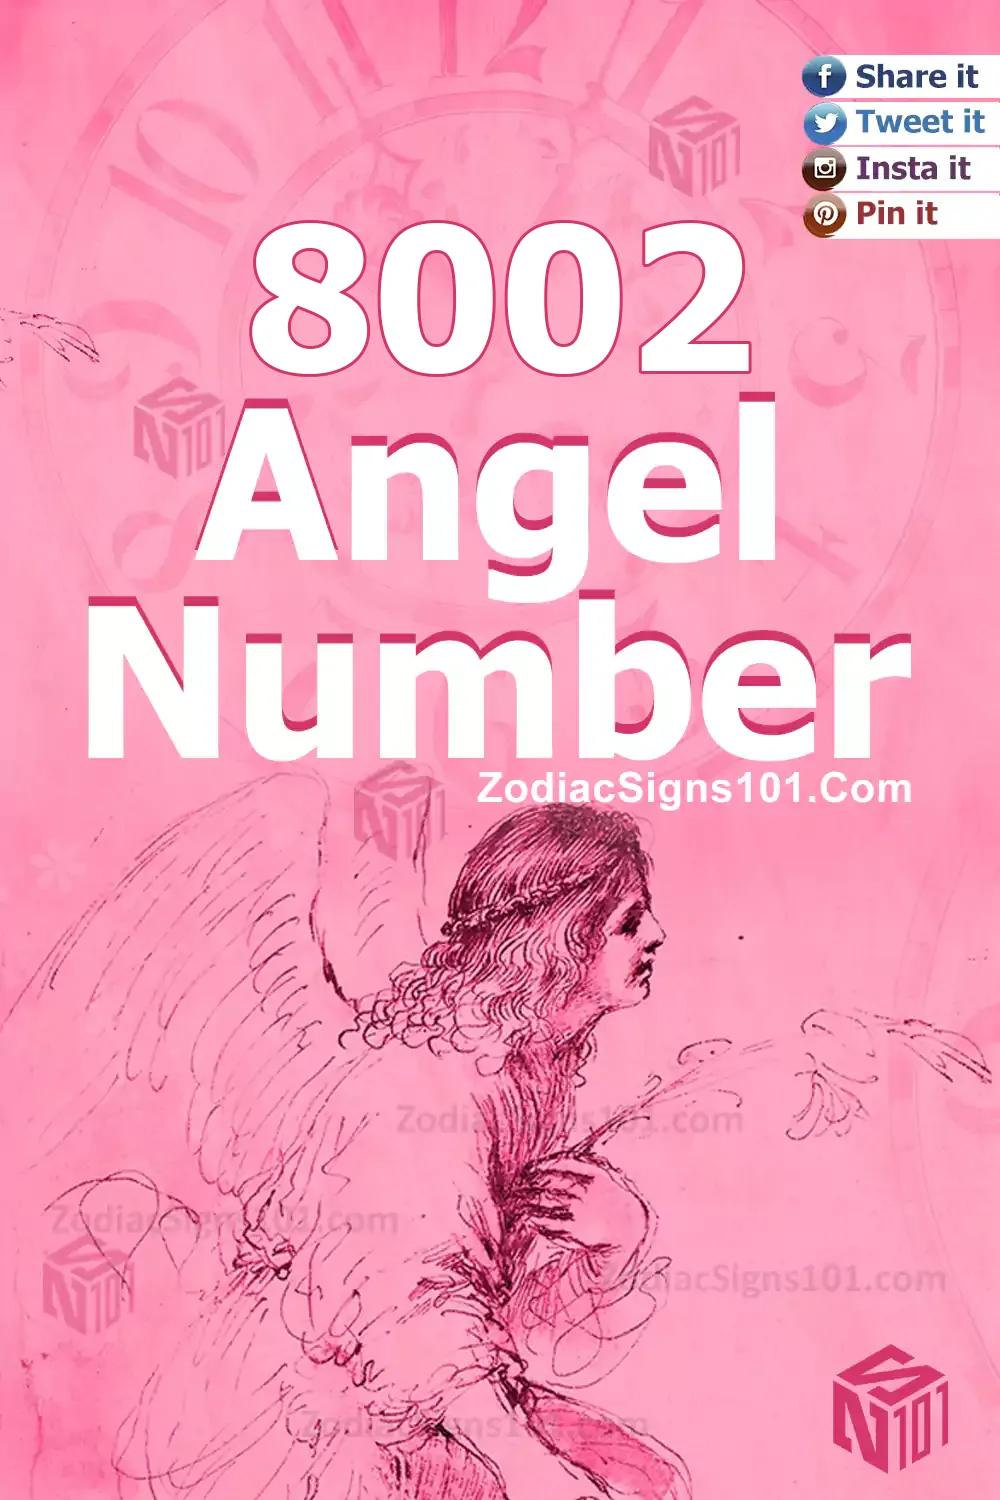 8002 Angel Number Meaning